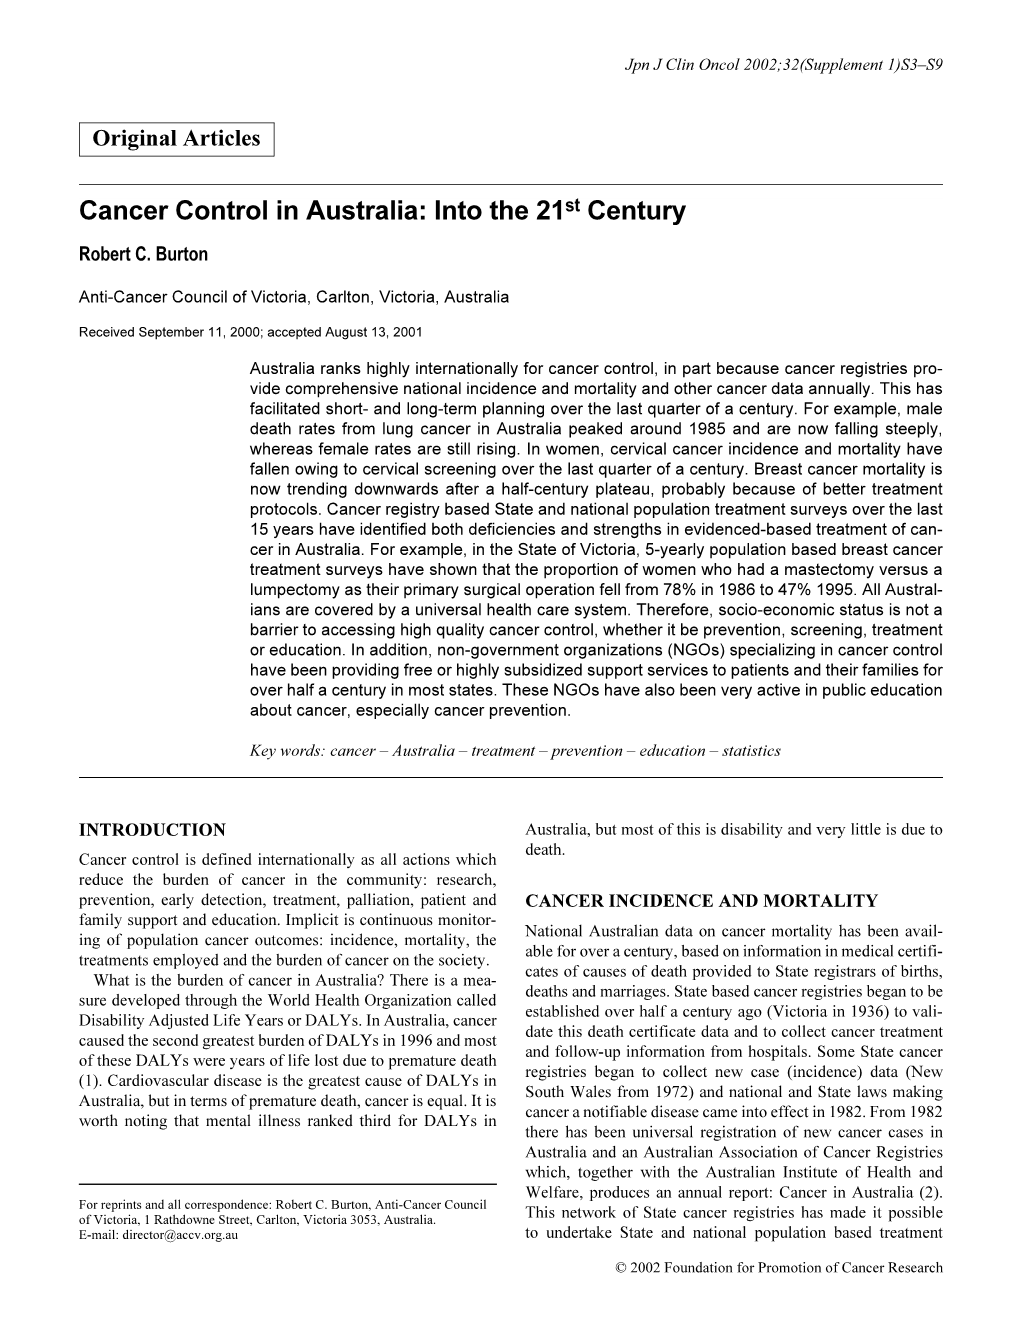 Cancer Control in Australia: Into the 21St Century